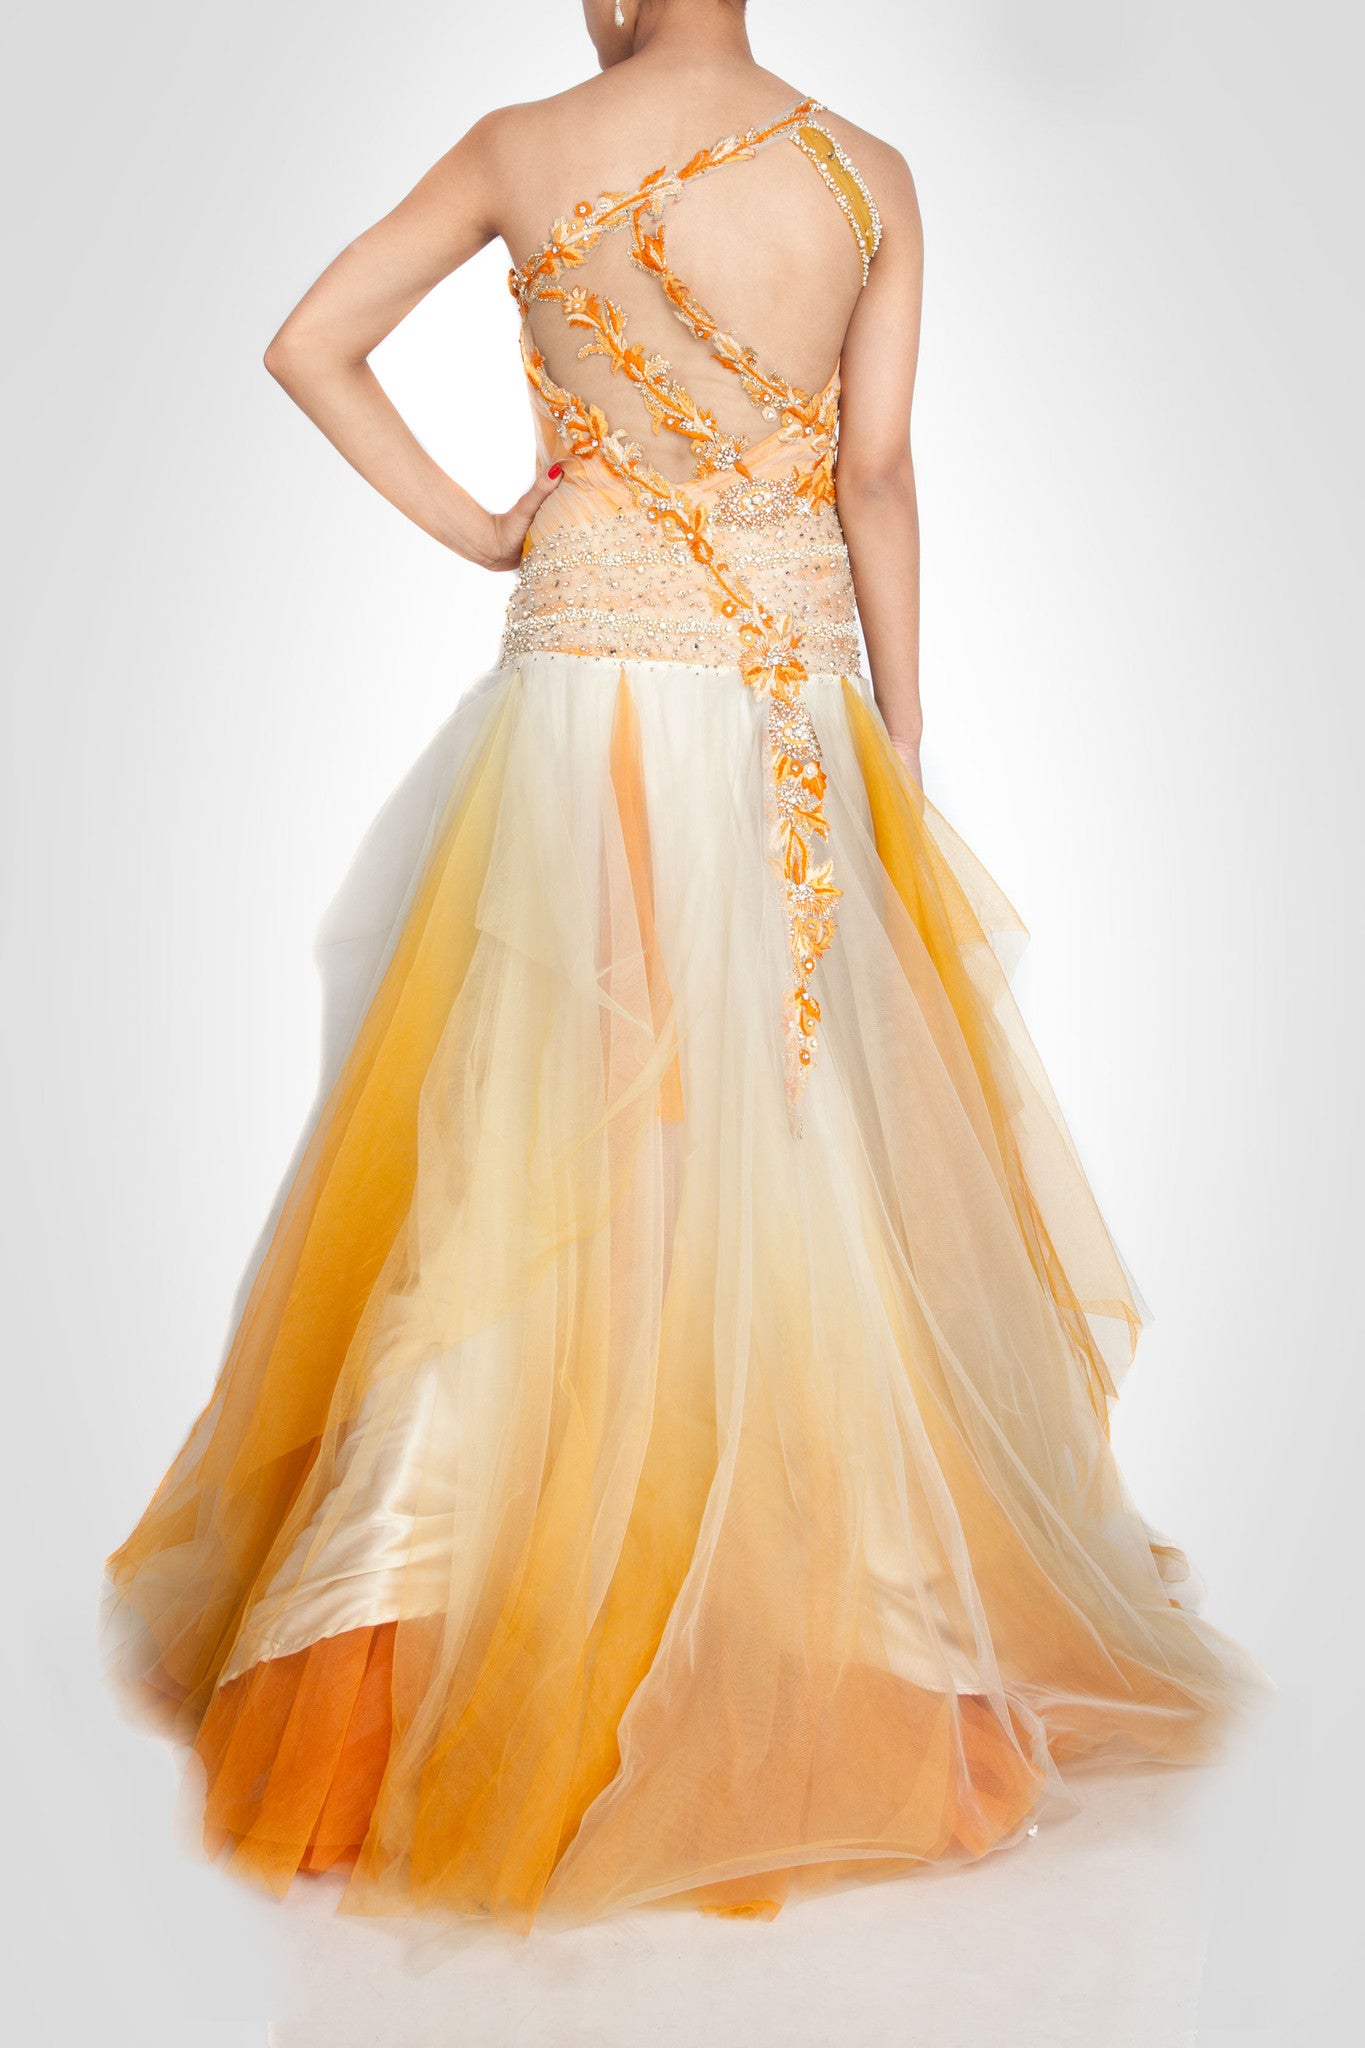 Net gown in White and Mustard color